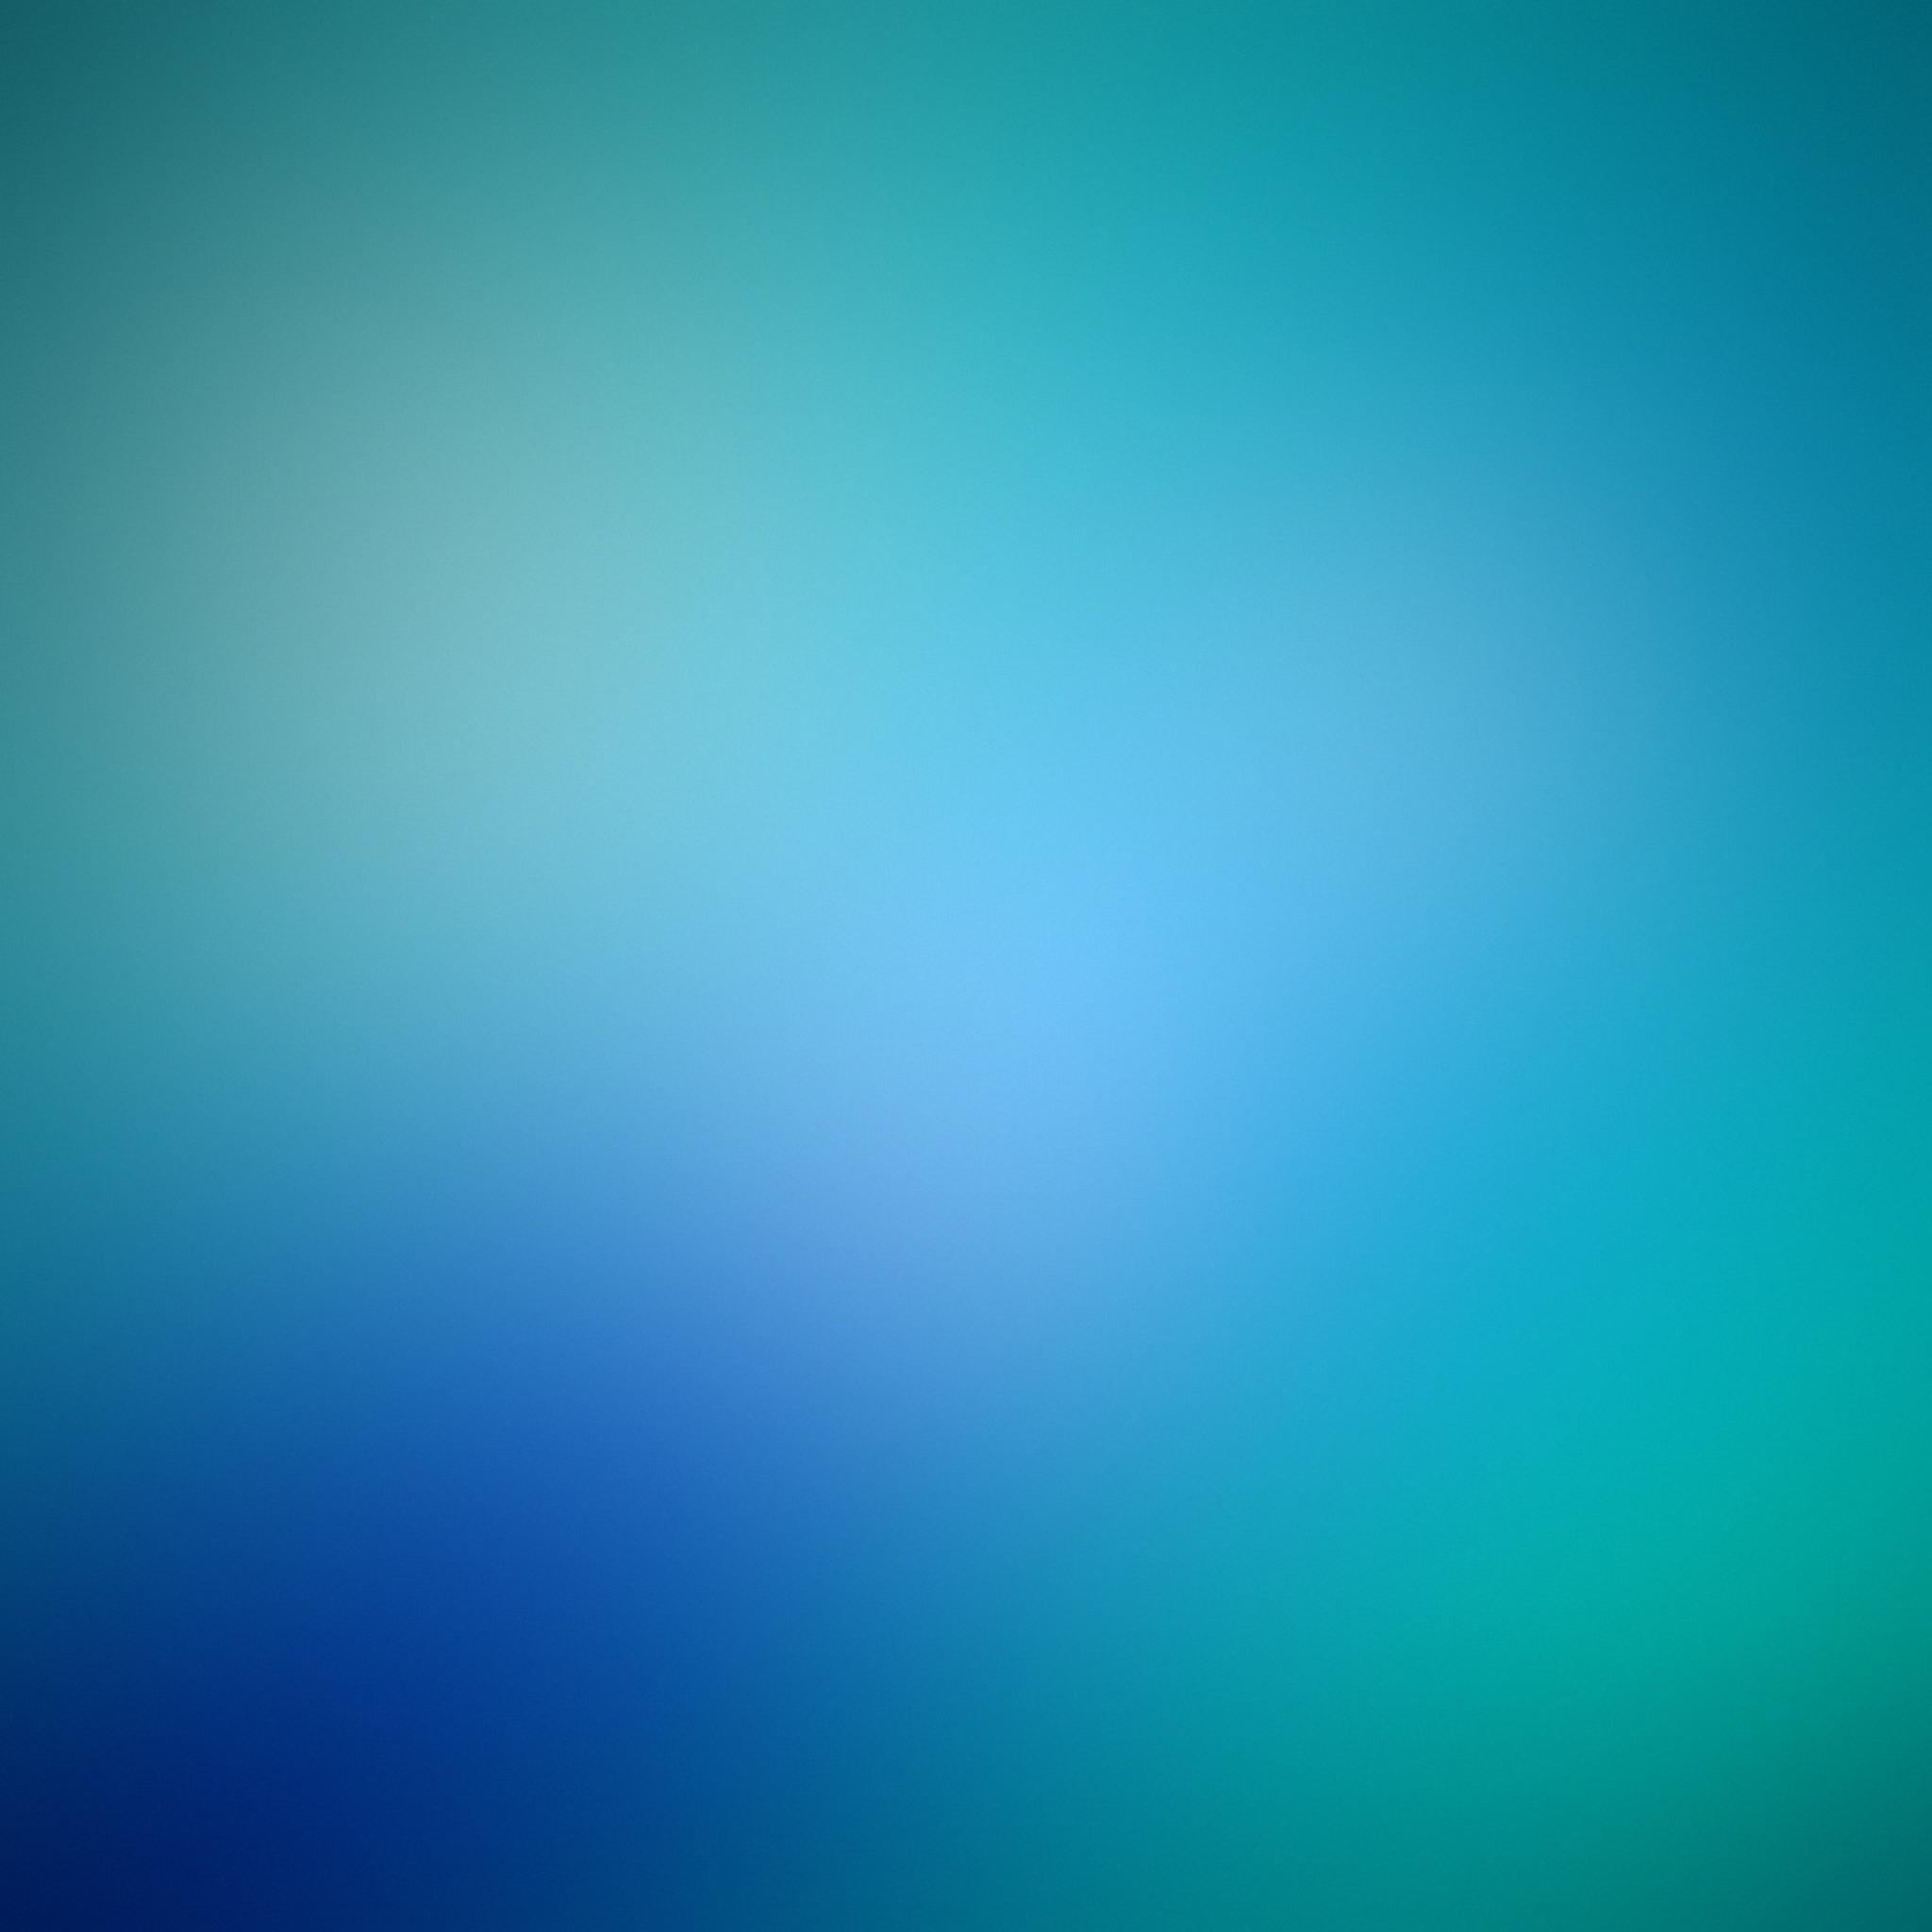 Solid Bright Blue Background Bright solid c